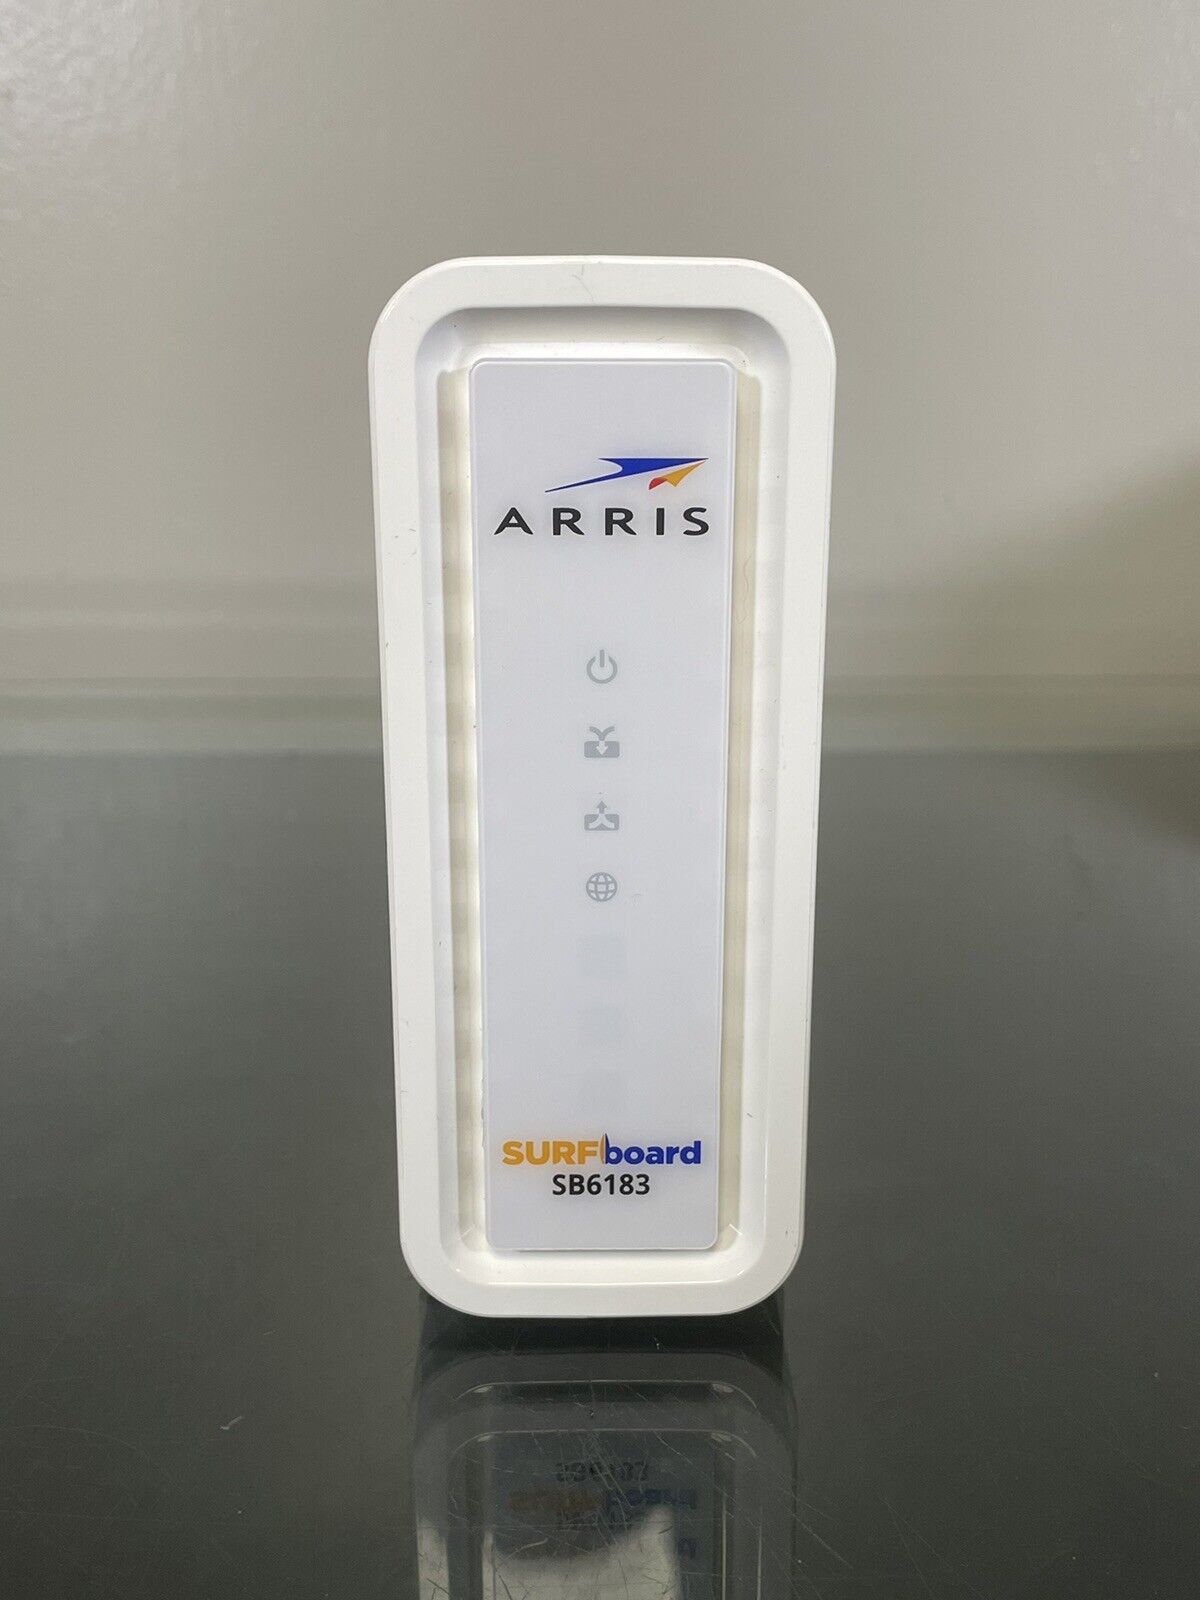 Fully Tested Arris Surfboard SB6183 Cable Modem